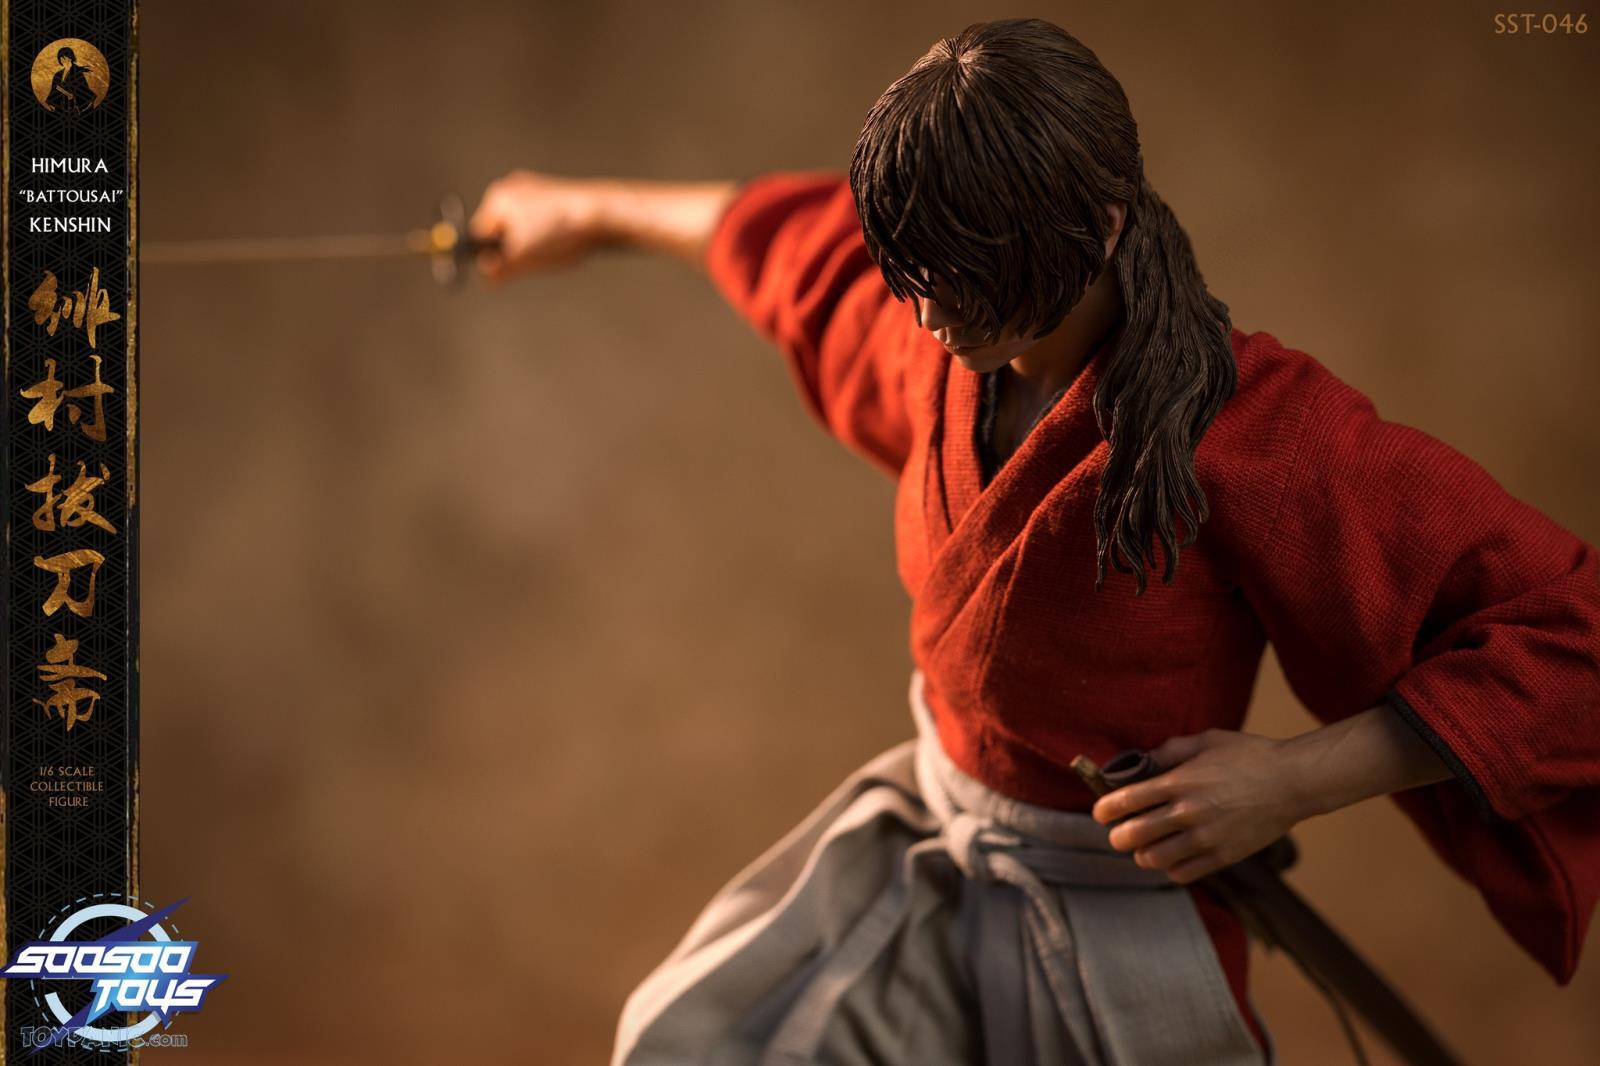 himura - NEW PRODUCT: 1/6 scale Rurouni Kenshin Collectible Figure from SooSooToys 712202251229PM_9557183